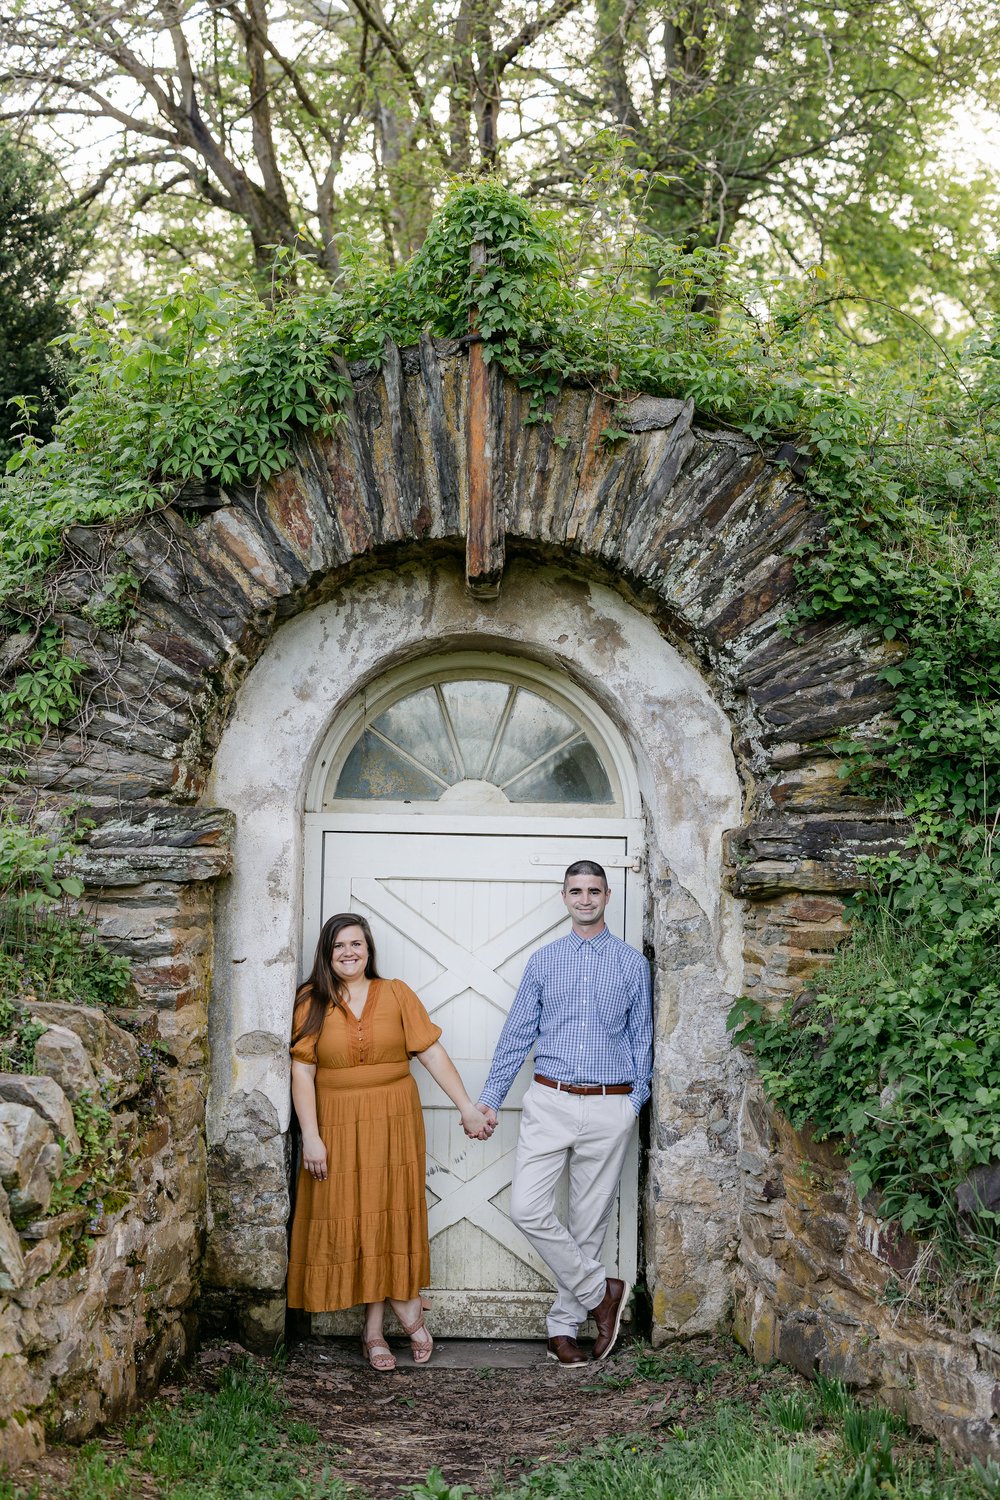 RBP-Ang-John-Engagement-Session-Teasers-Valley-Forge-PA-May-2022-20.jpg